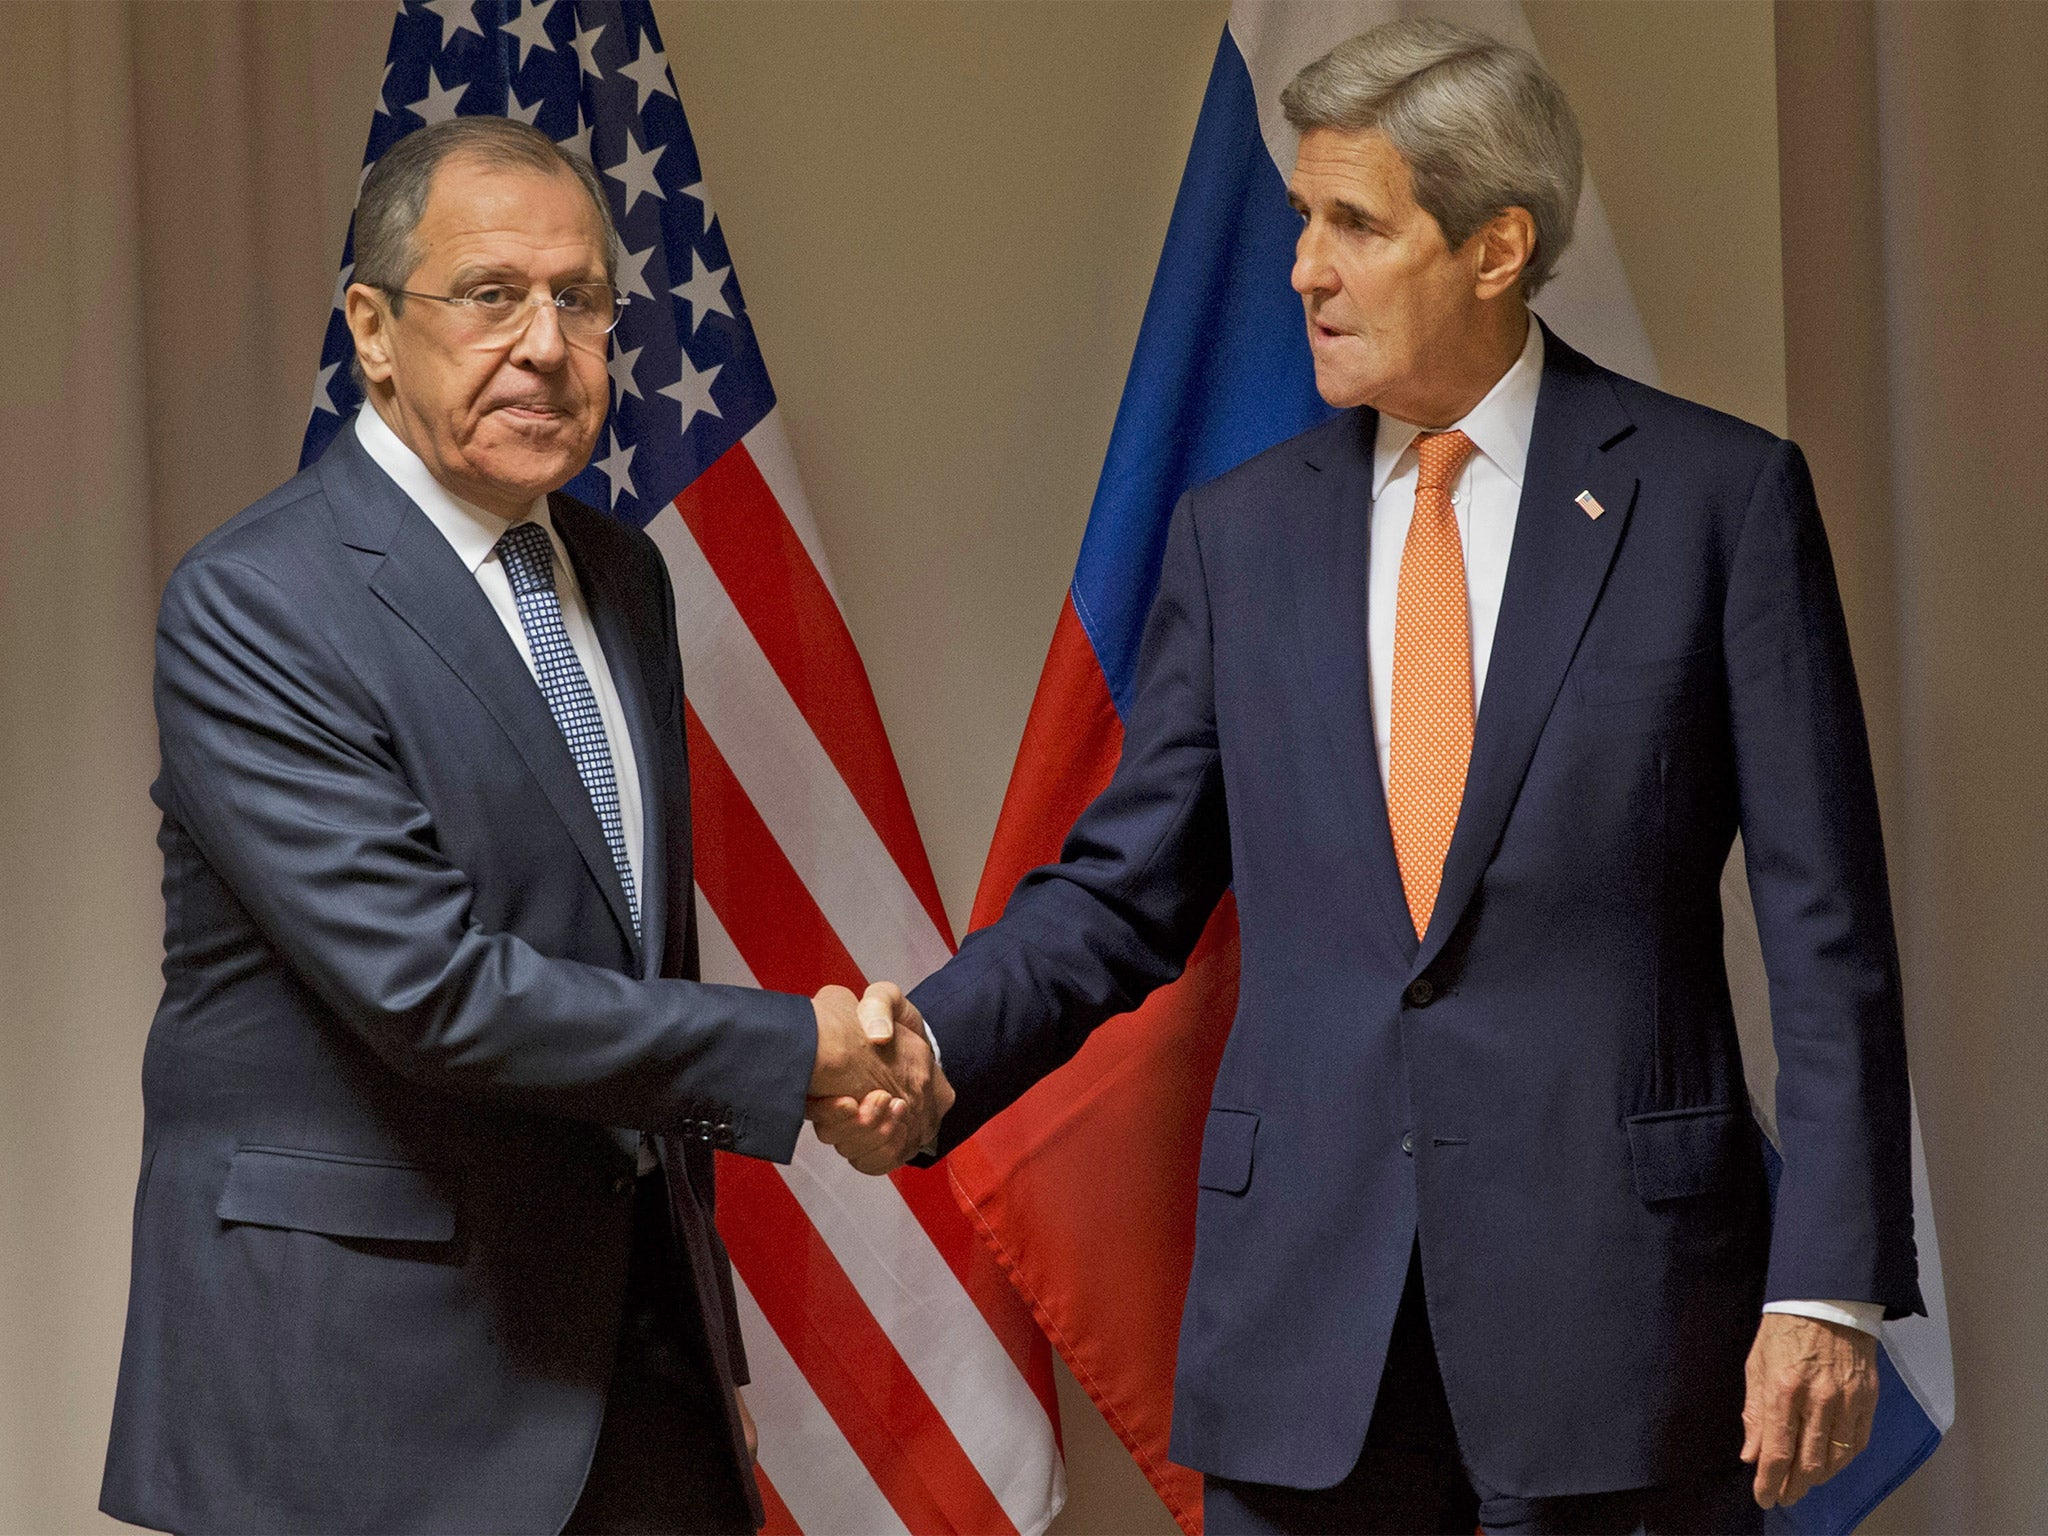 US Secretary of State John Kerry, right, shakes hands with Russian Foreign Minister Sergey Lavrov before their meeting about Syria, in Zurich, Switzerland